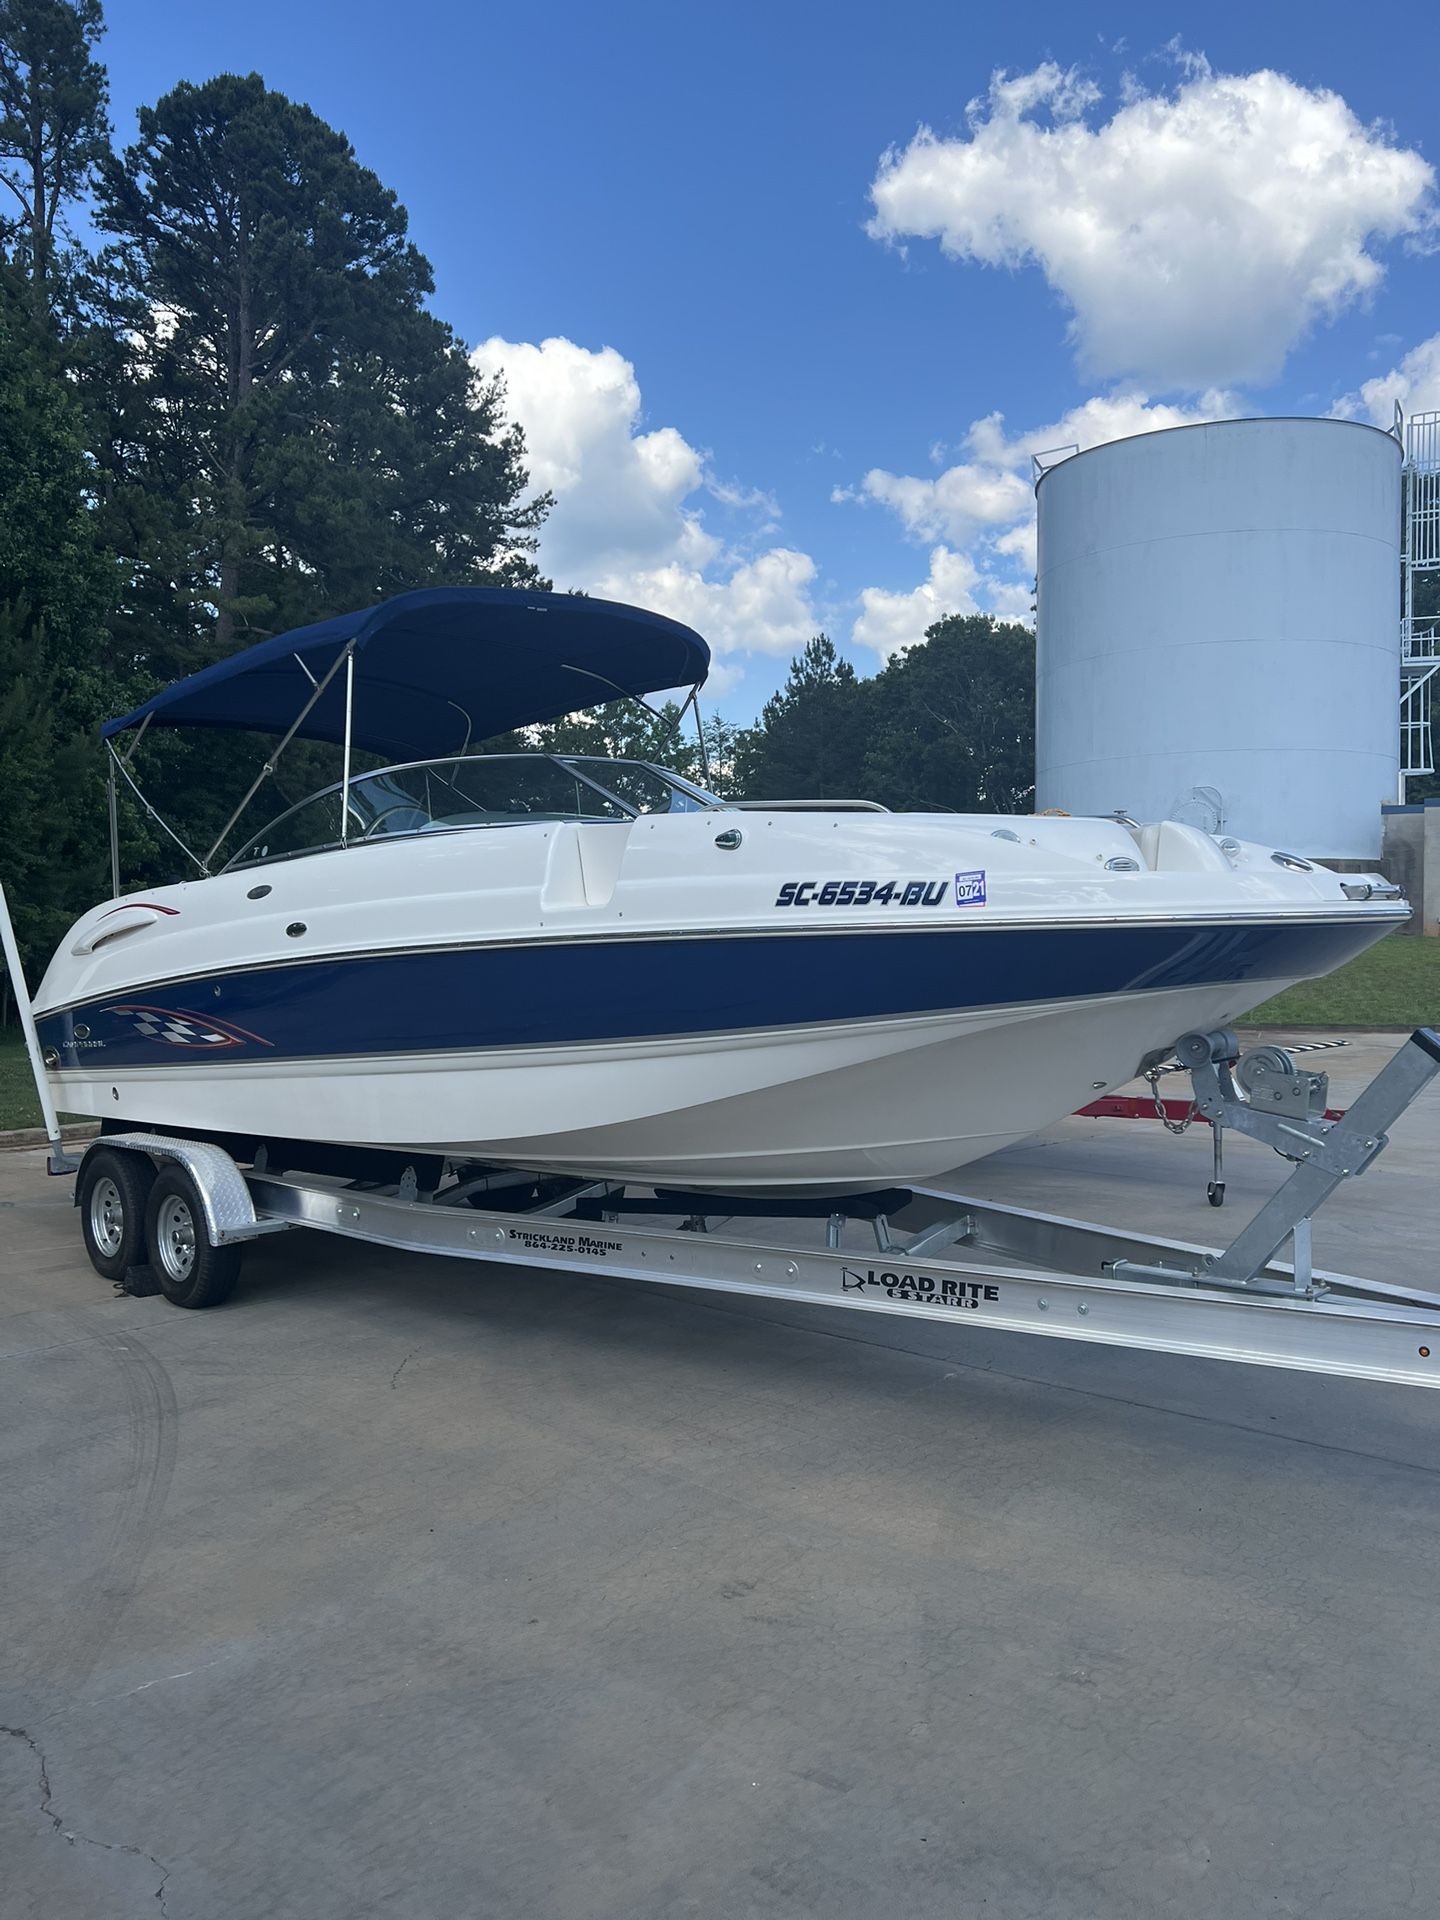 Chaparral Model 274 Sun 2006 - 28 Foot - Only 250 Hours